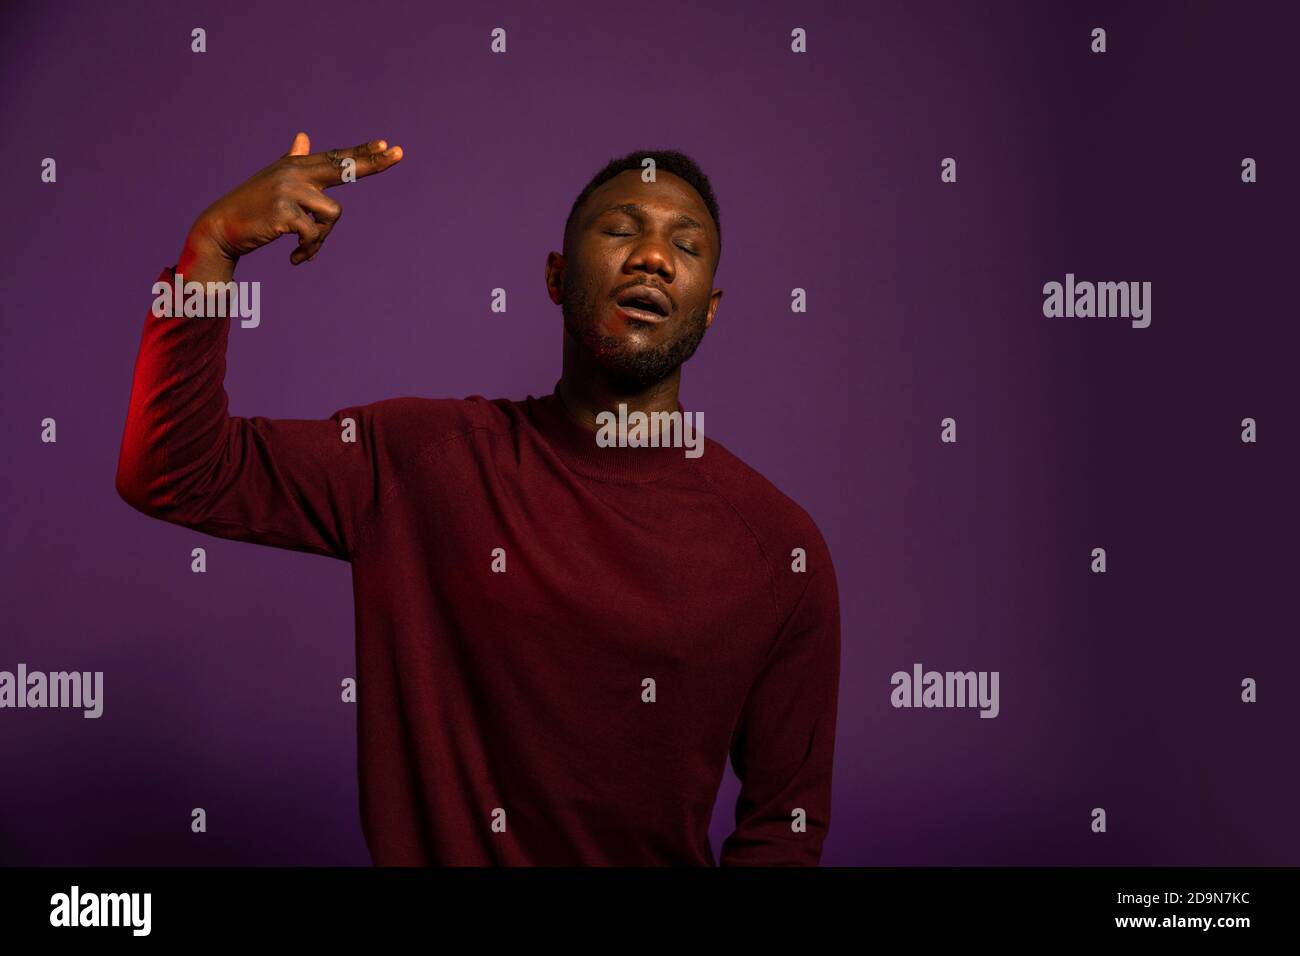 Black man showing I show myself hand gesture, body language, and facial expression. Isolated background. Front view. Medium shot. Stock Photo